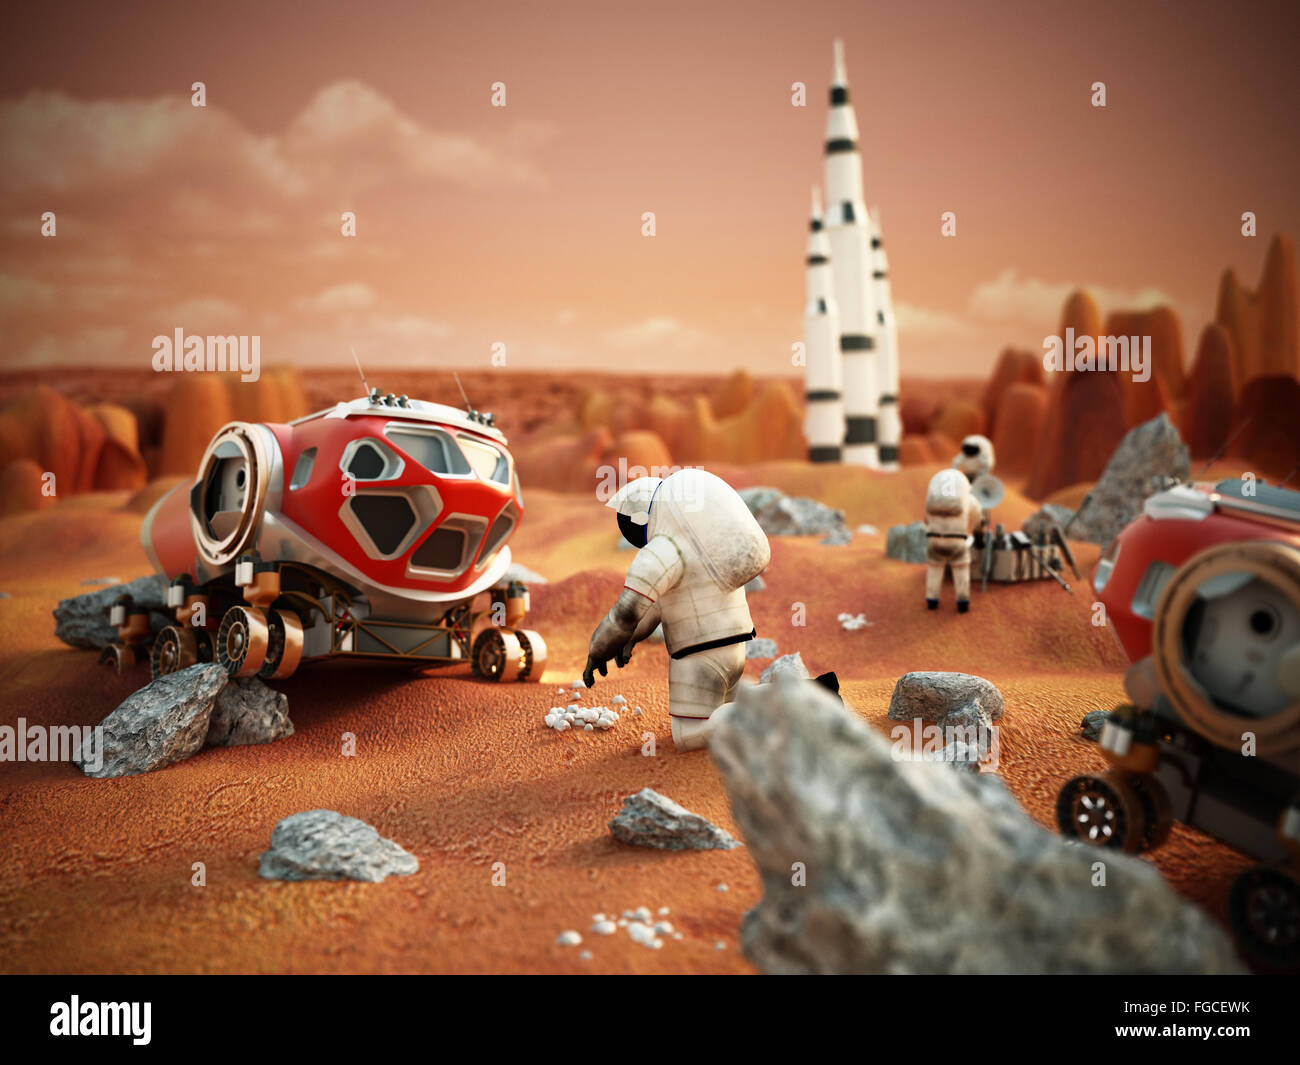 Fictitious scene including vehicles and astronauts depicts manned Mars mission Stock Photo